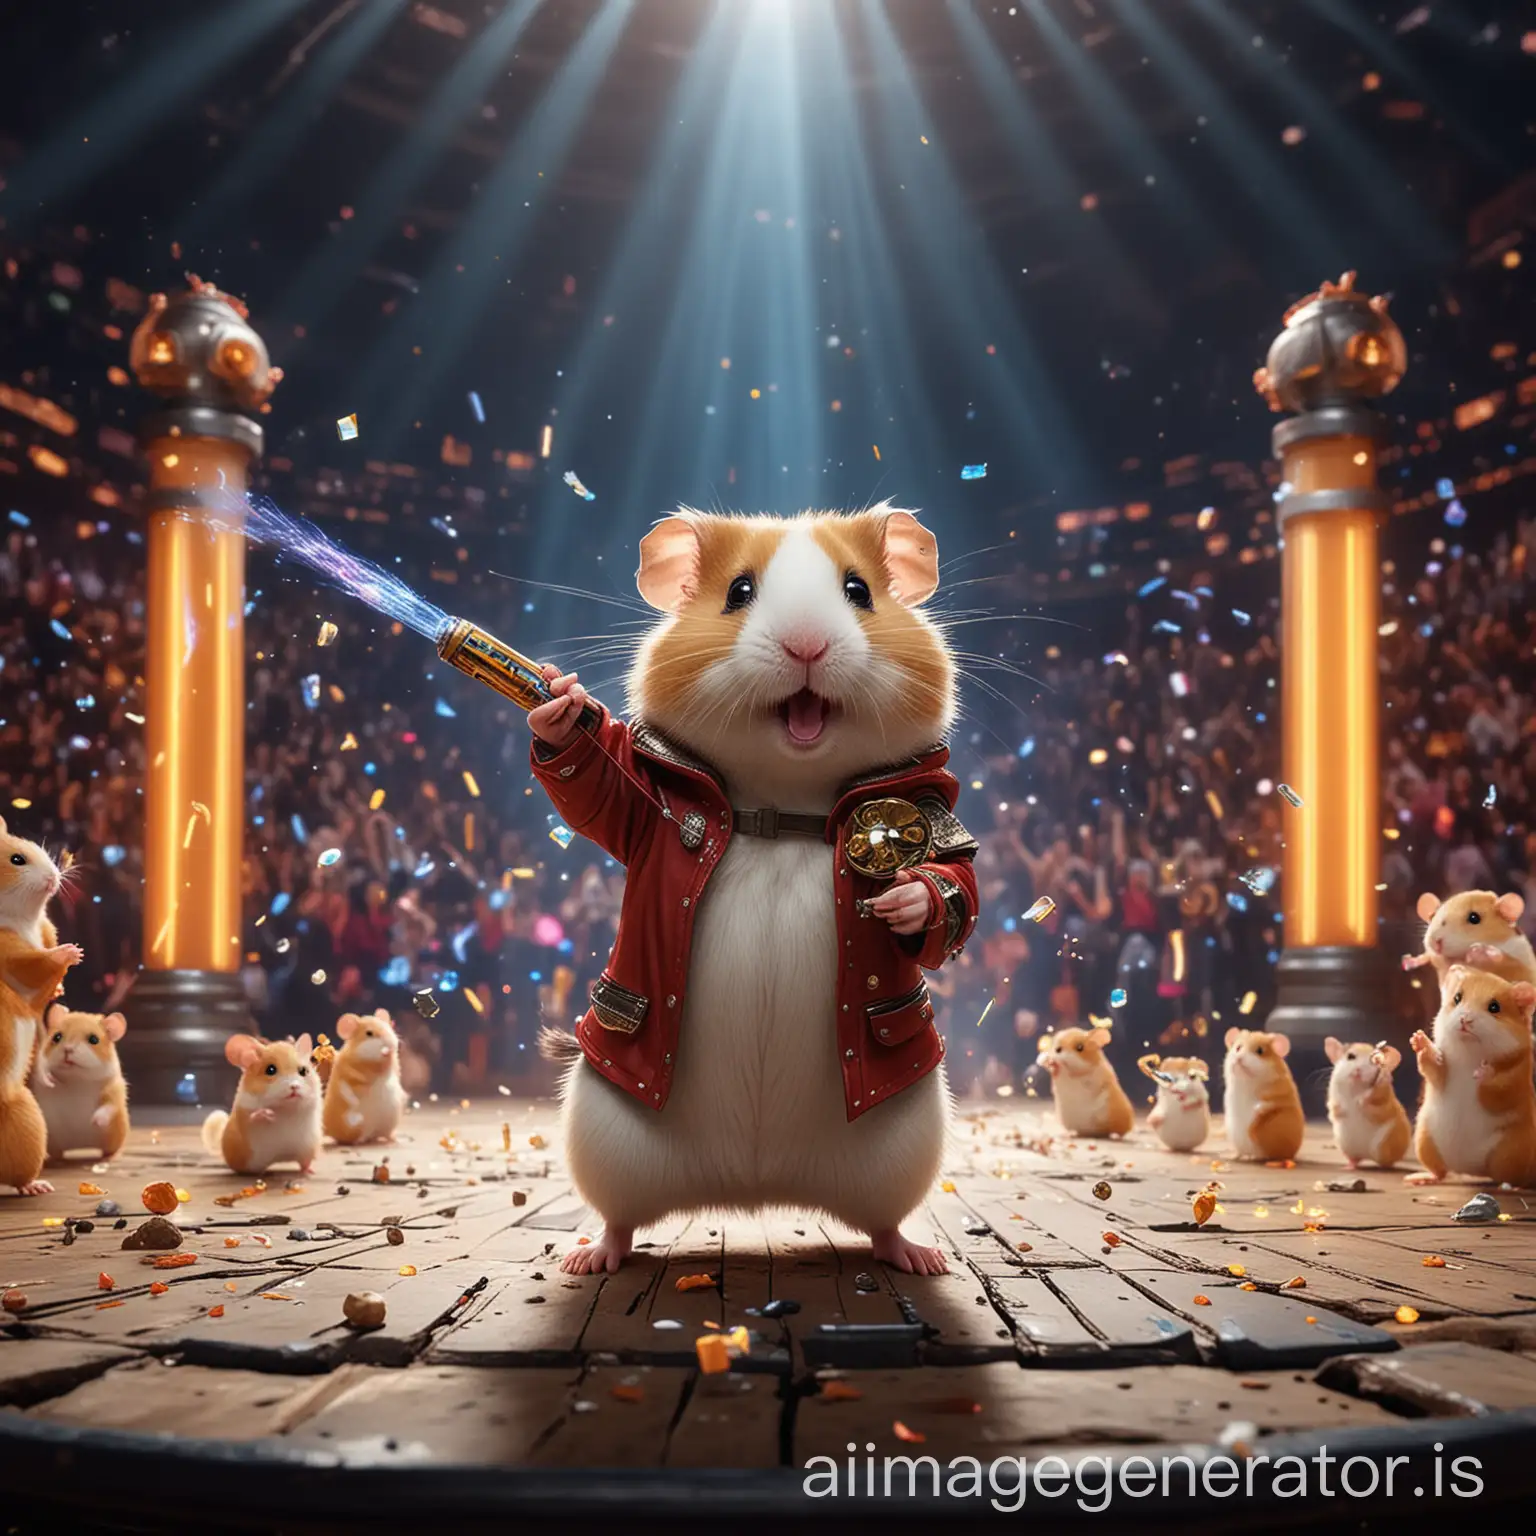 An extravagant stage design: A grand and magnificent arena with a futuristic, digital background. In the center of the stage stands an energetic and charismatic hamster artist. The hamster is dressed in shiny armor, holding a microphone in one paw and raising the other triumphantly. Bright spotlights illuminate the hamster, while the background features holographic charts and symbols representing the cryptocurrency world. The crowd is filled with enthusiastic hamsters, cheering and waving glow sticks. The atmosphere is electrifying, capturing the excitement of Hamster Kombat.